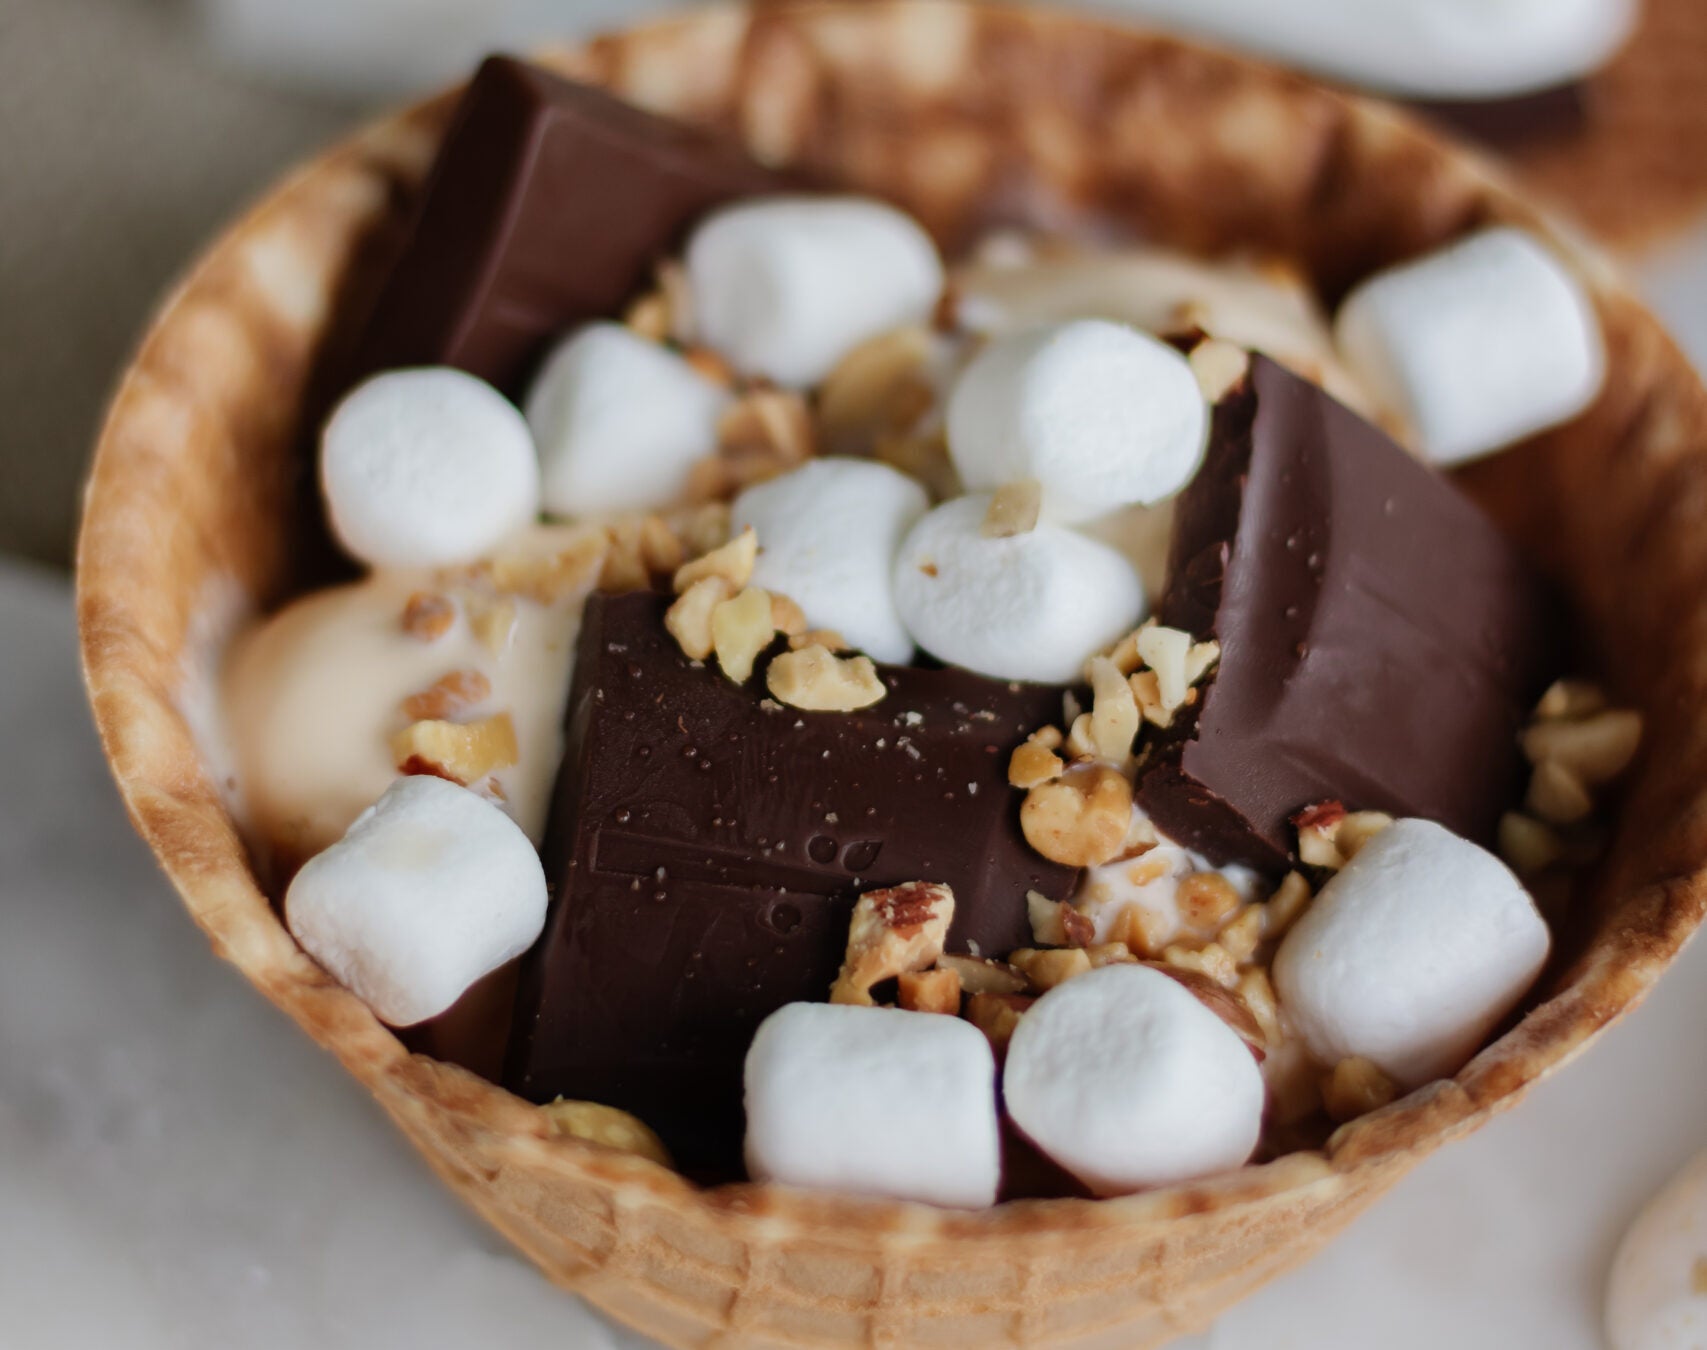 S'more Bowls with Mini Marshmallows and Endangered Species Chocolate